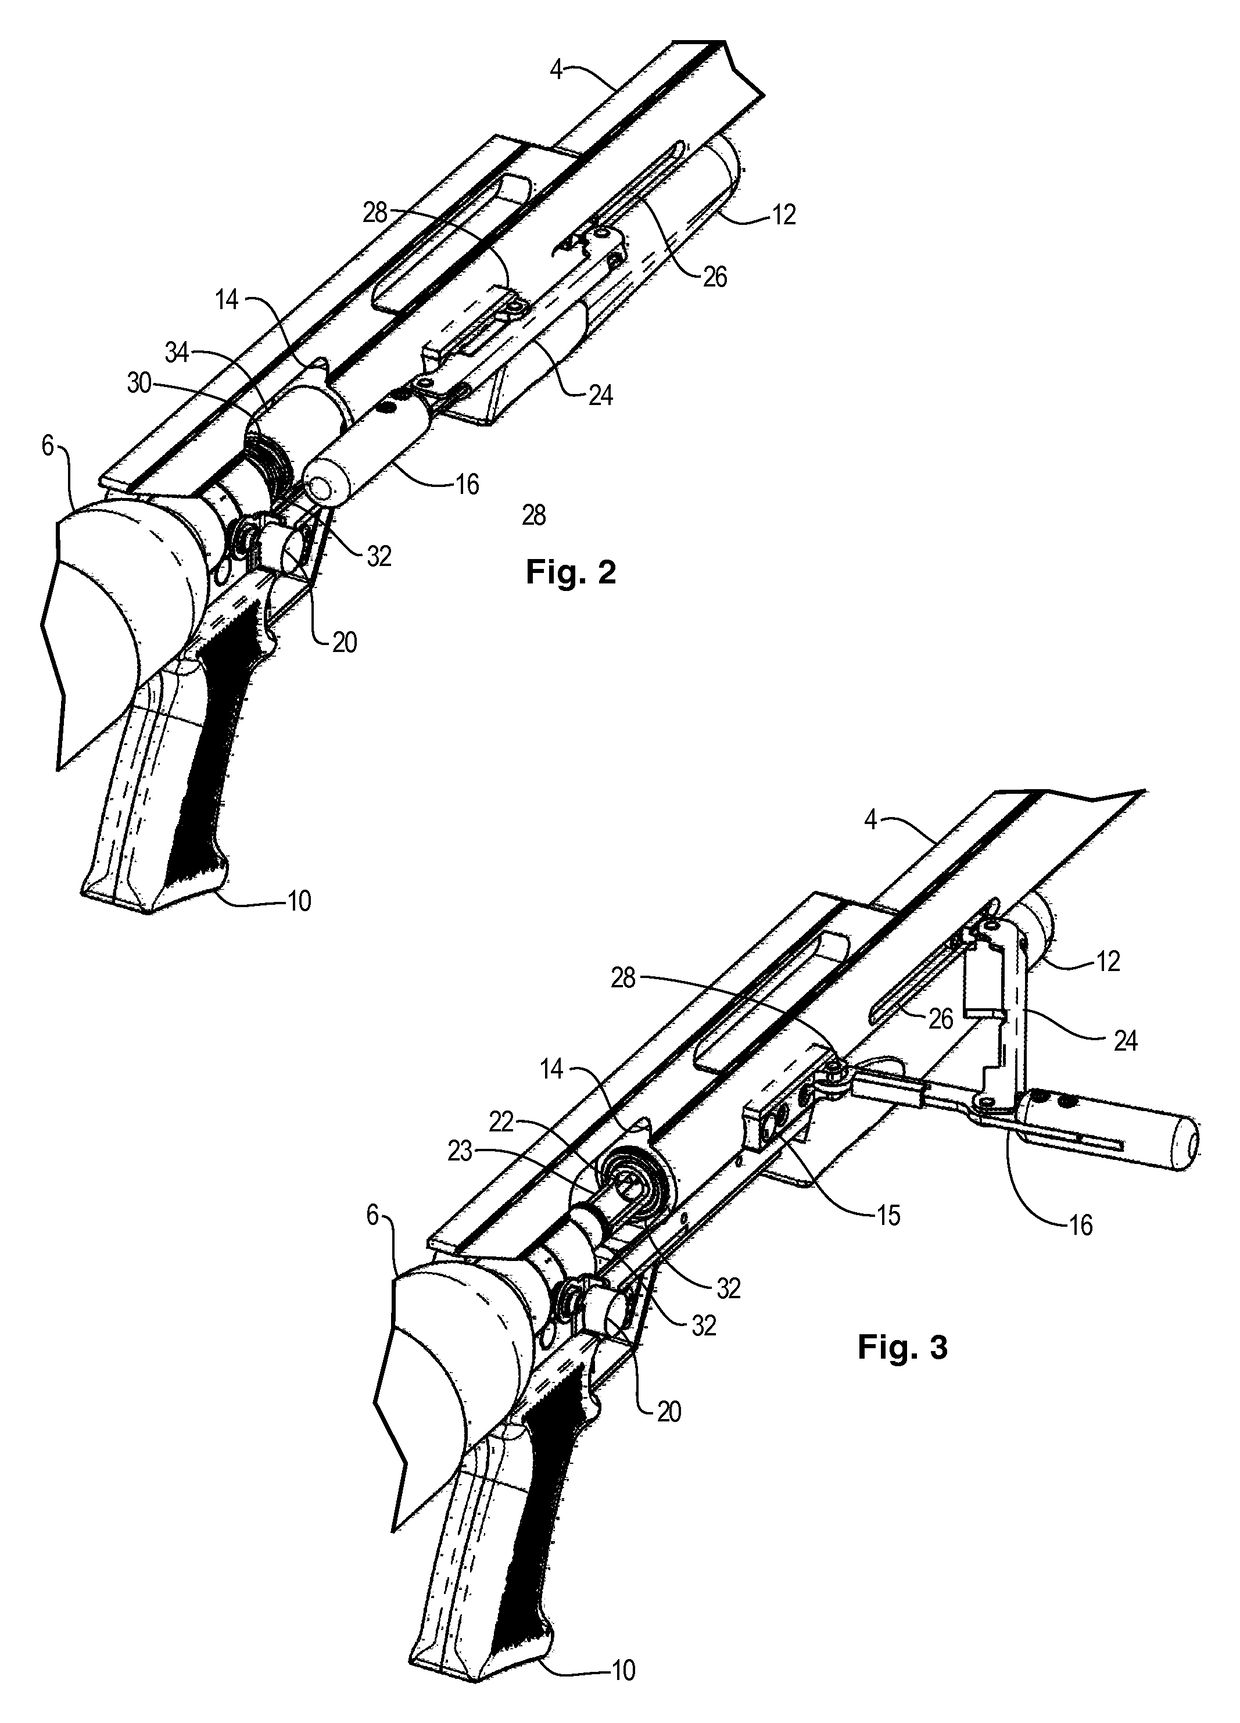 Compressed gas gun with improved operating mechanism